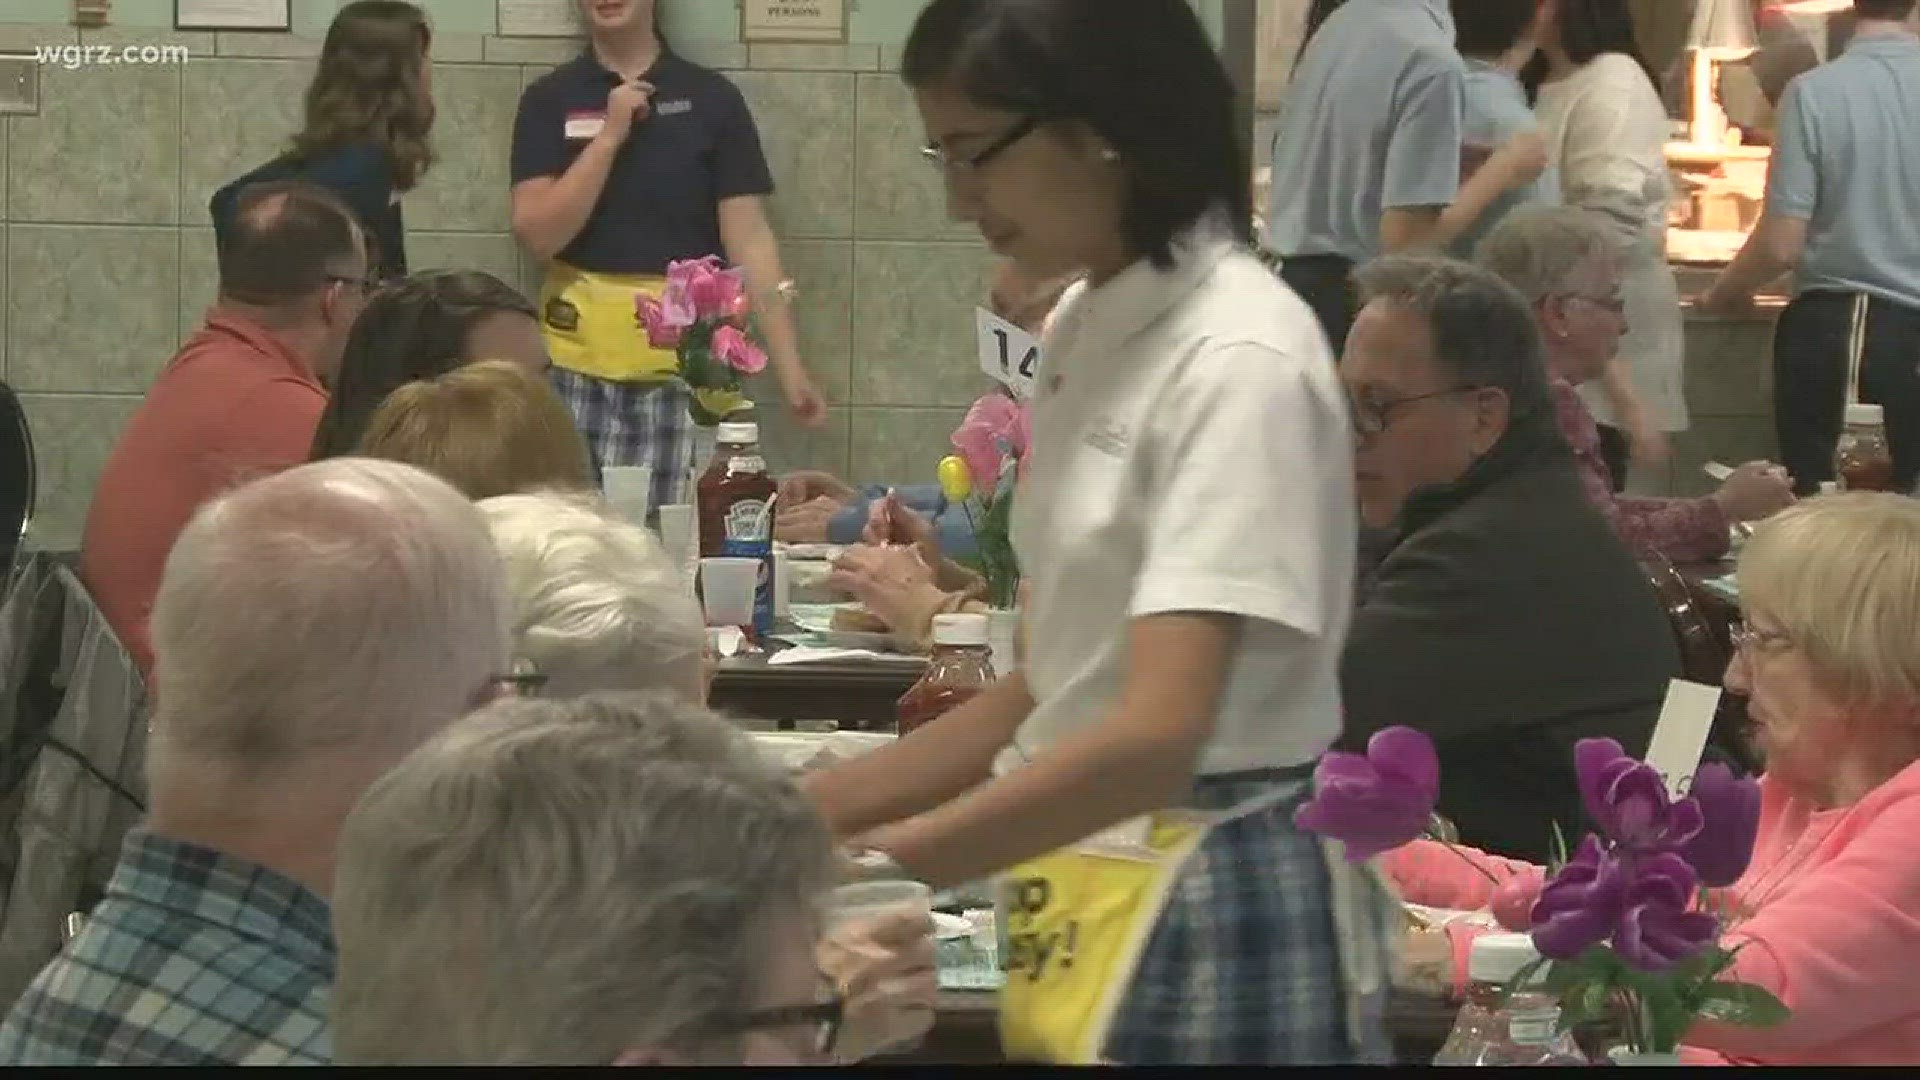 Daybreak's Stephanie Barnes shows us how Our Lady of Blessed Sacrament does fish fry Friday's.